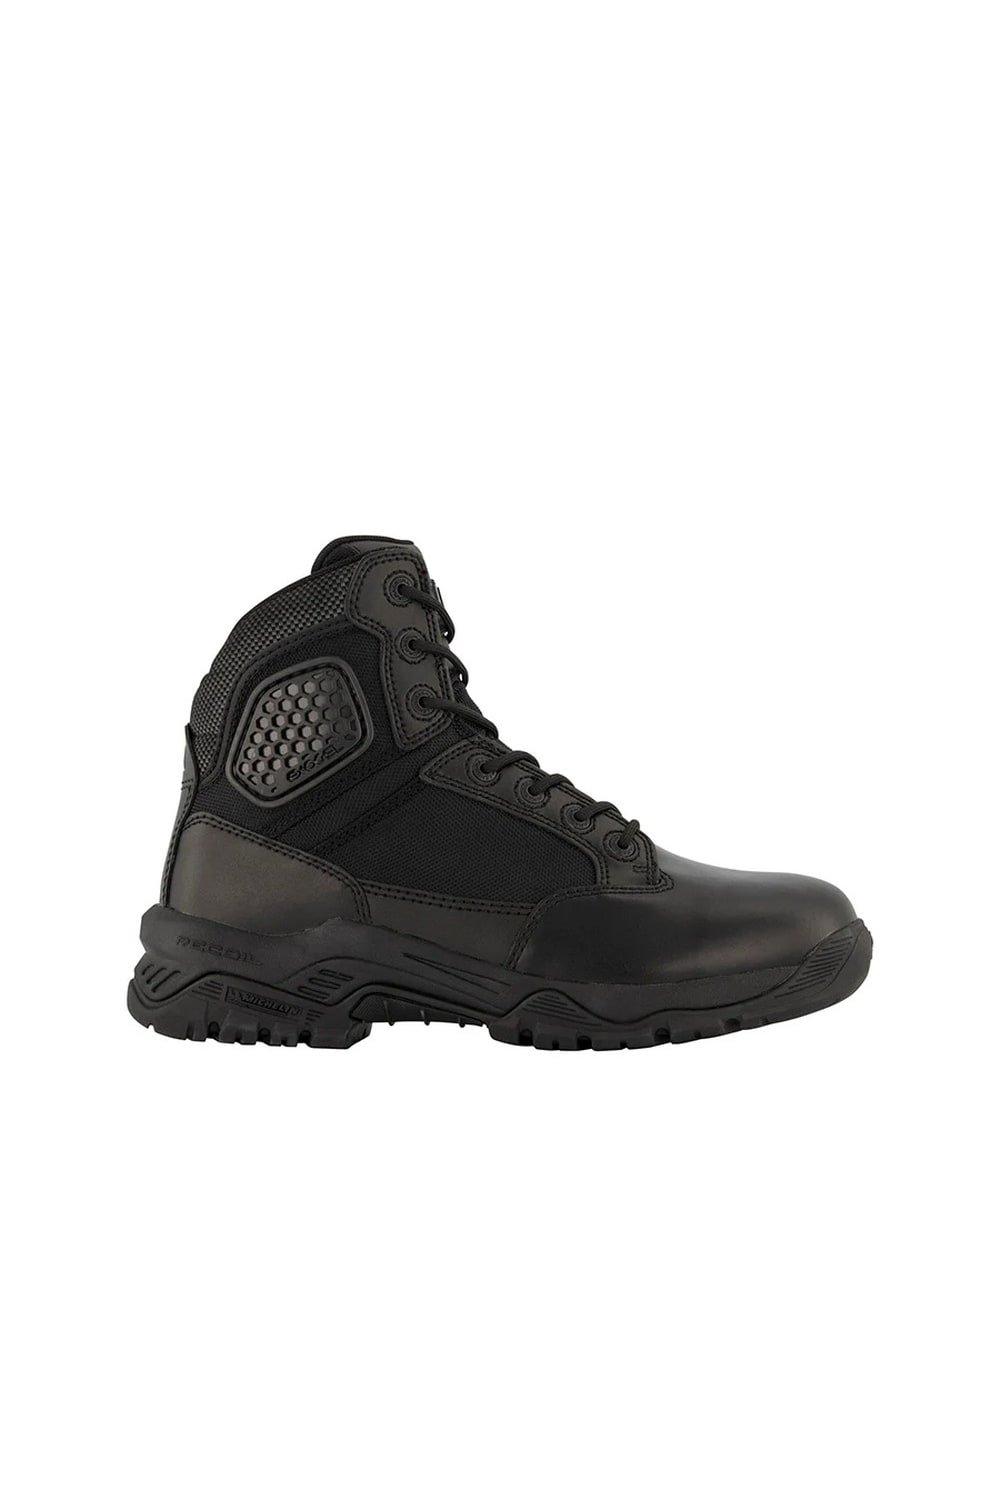 Strike Force 6.0 Uniform Leather Safety Boots